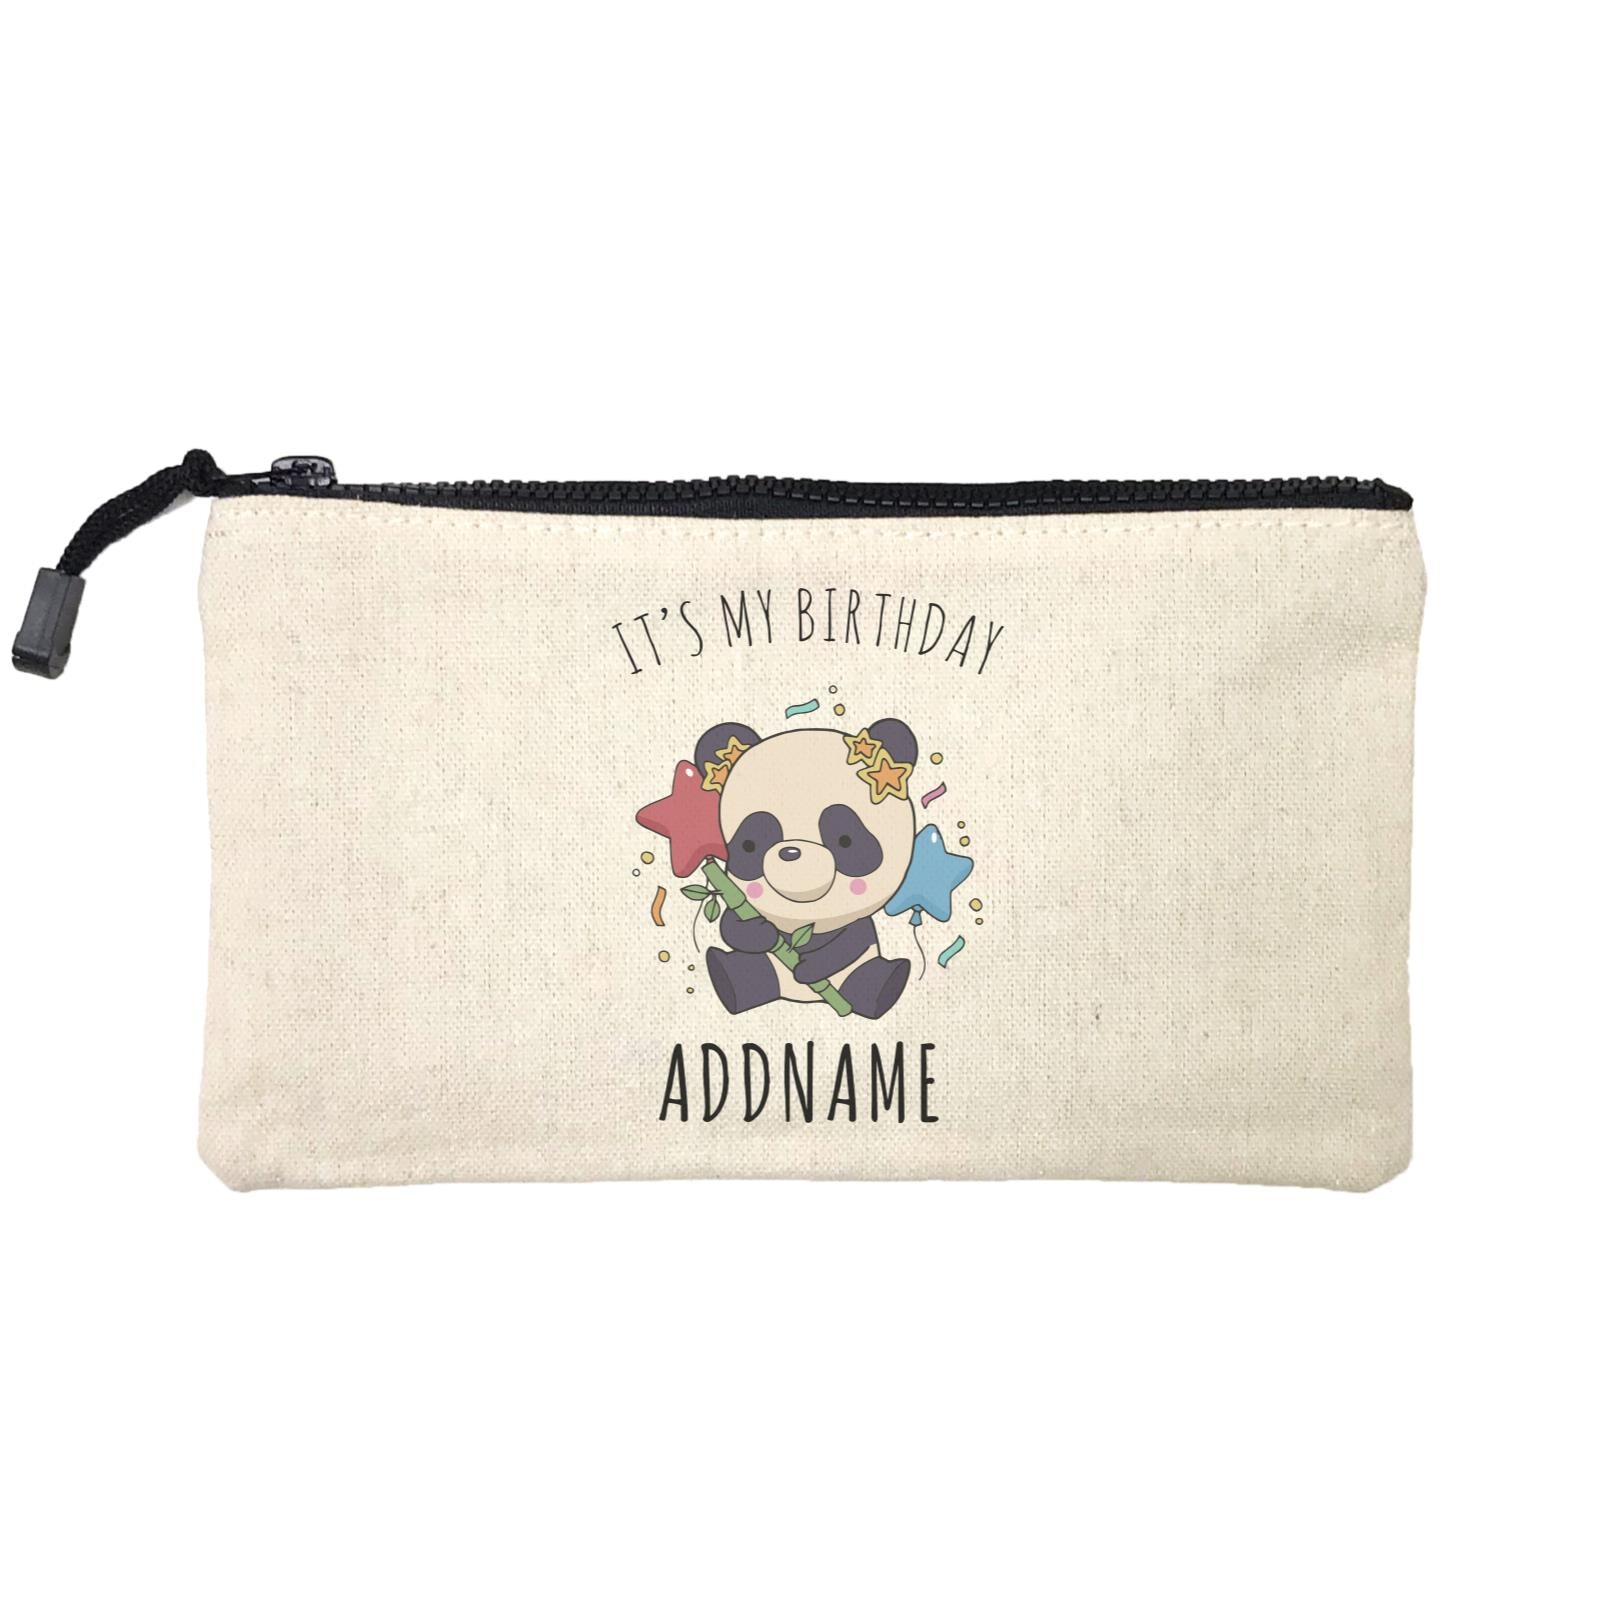 Birthday Sketch Animals Panda with Party Hat Holding Bamboo It's My Birthday Addname Mini Accessories Stationery Pouch